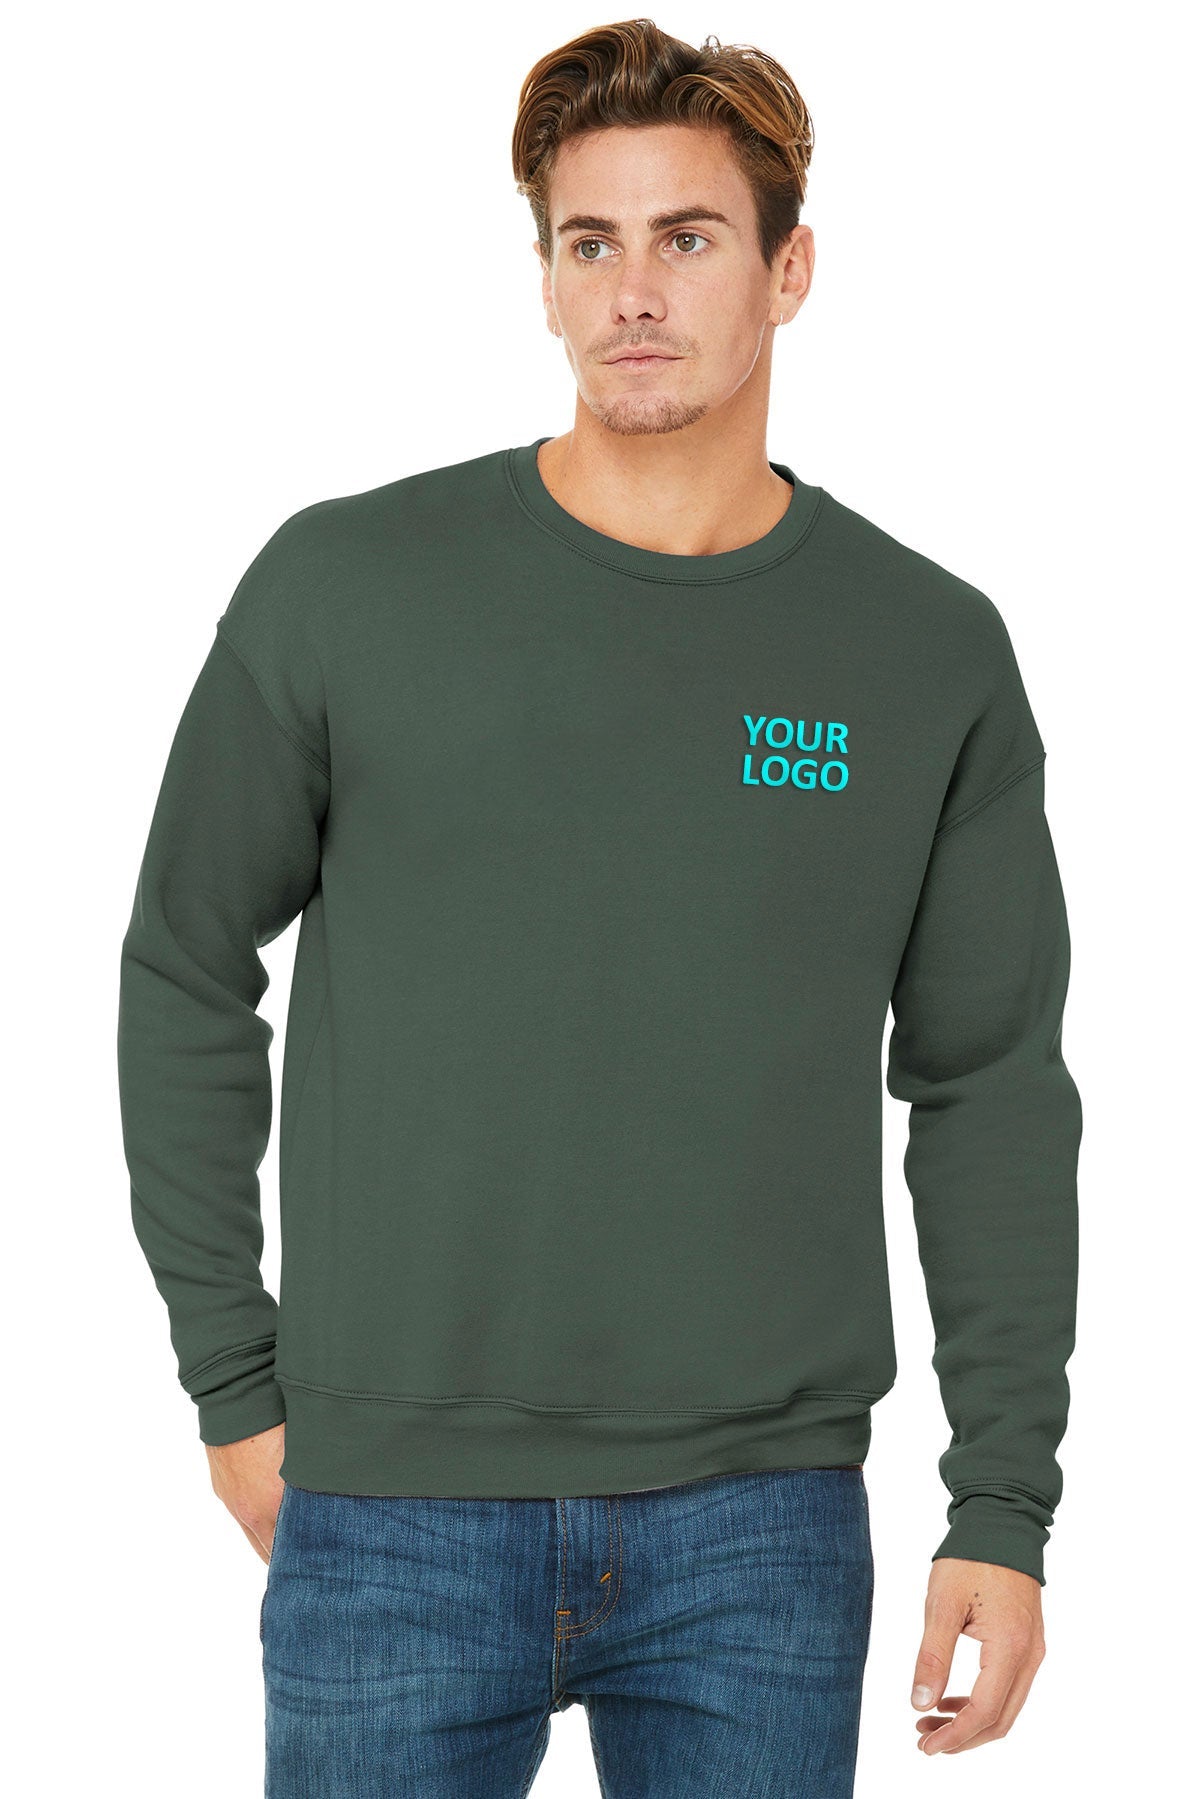 Bella + Canvas Military Green 3945 sweatshirts with logo embroidery